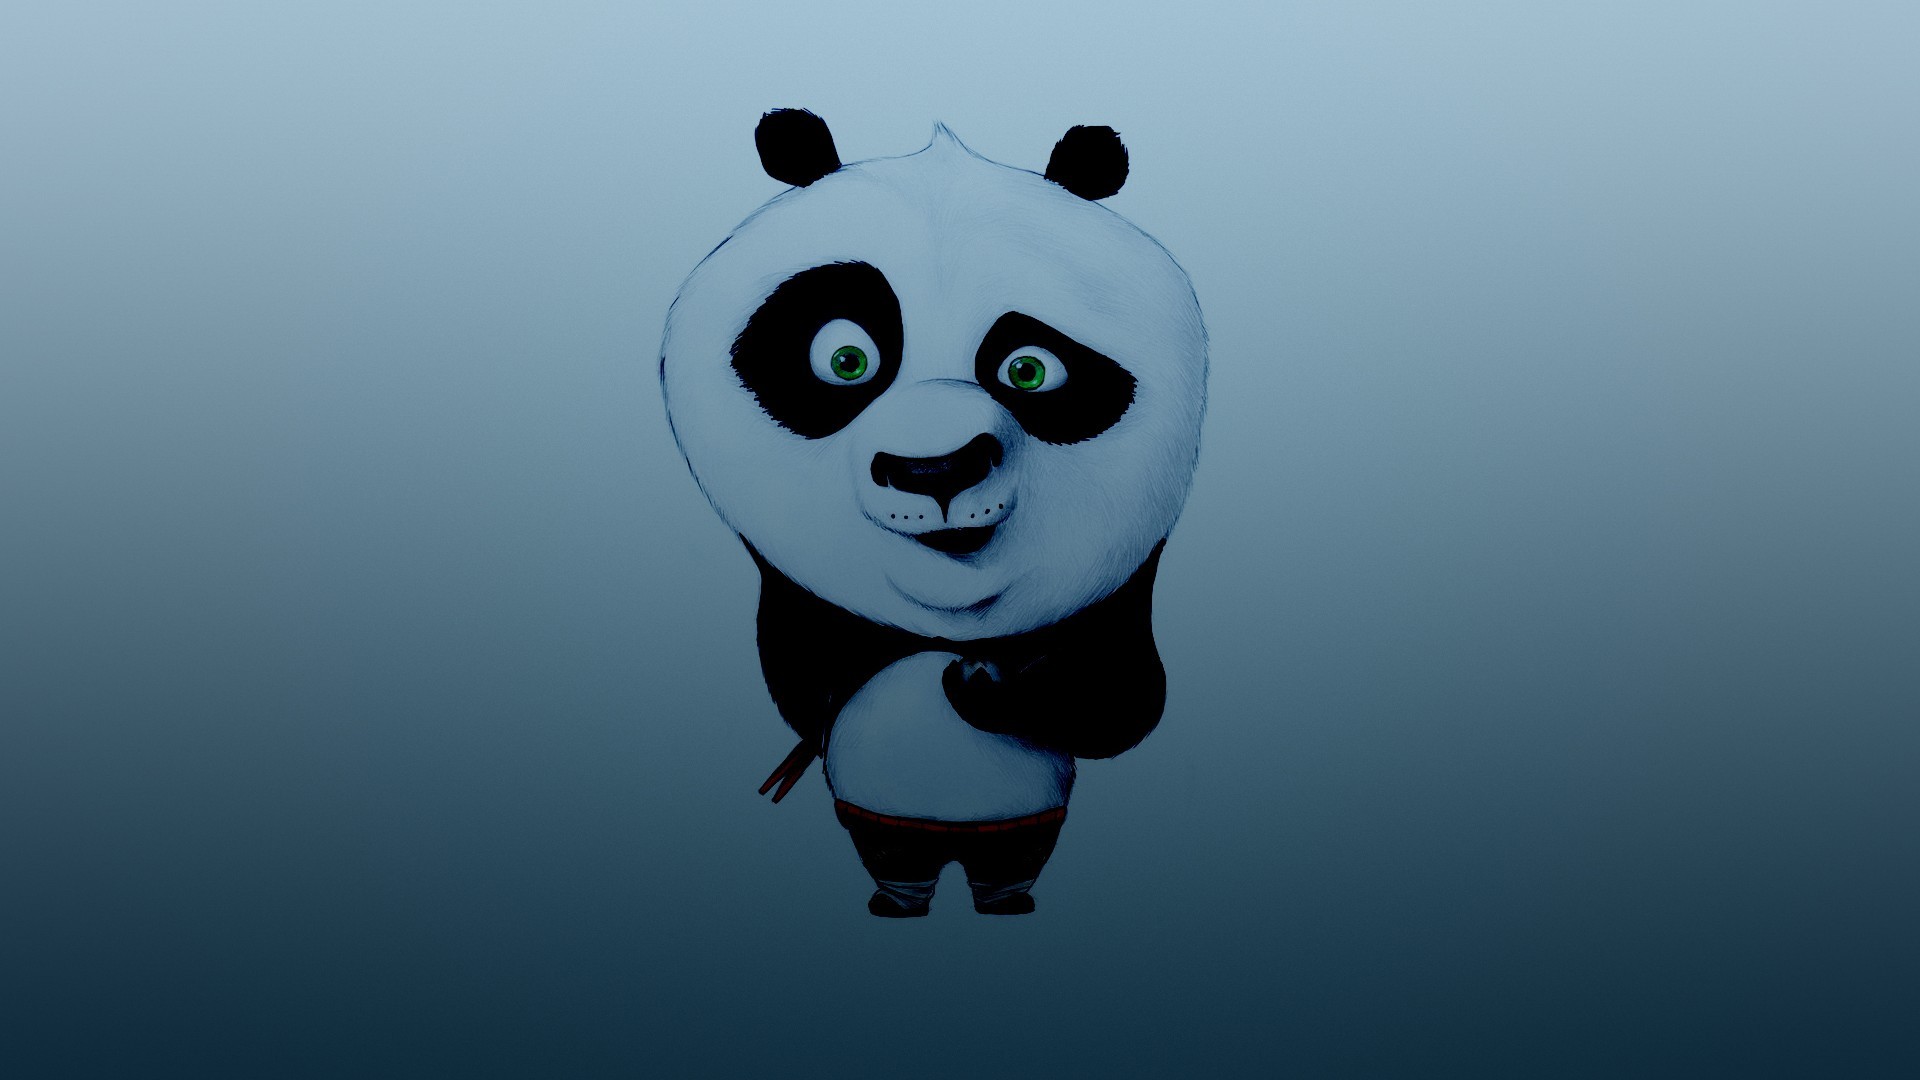 Mobile wallpaper: Cartoon, Background, Panda Kung Fu, 27724 download the  picture for free.